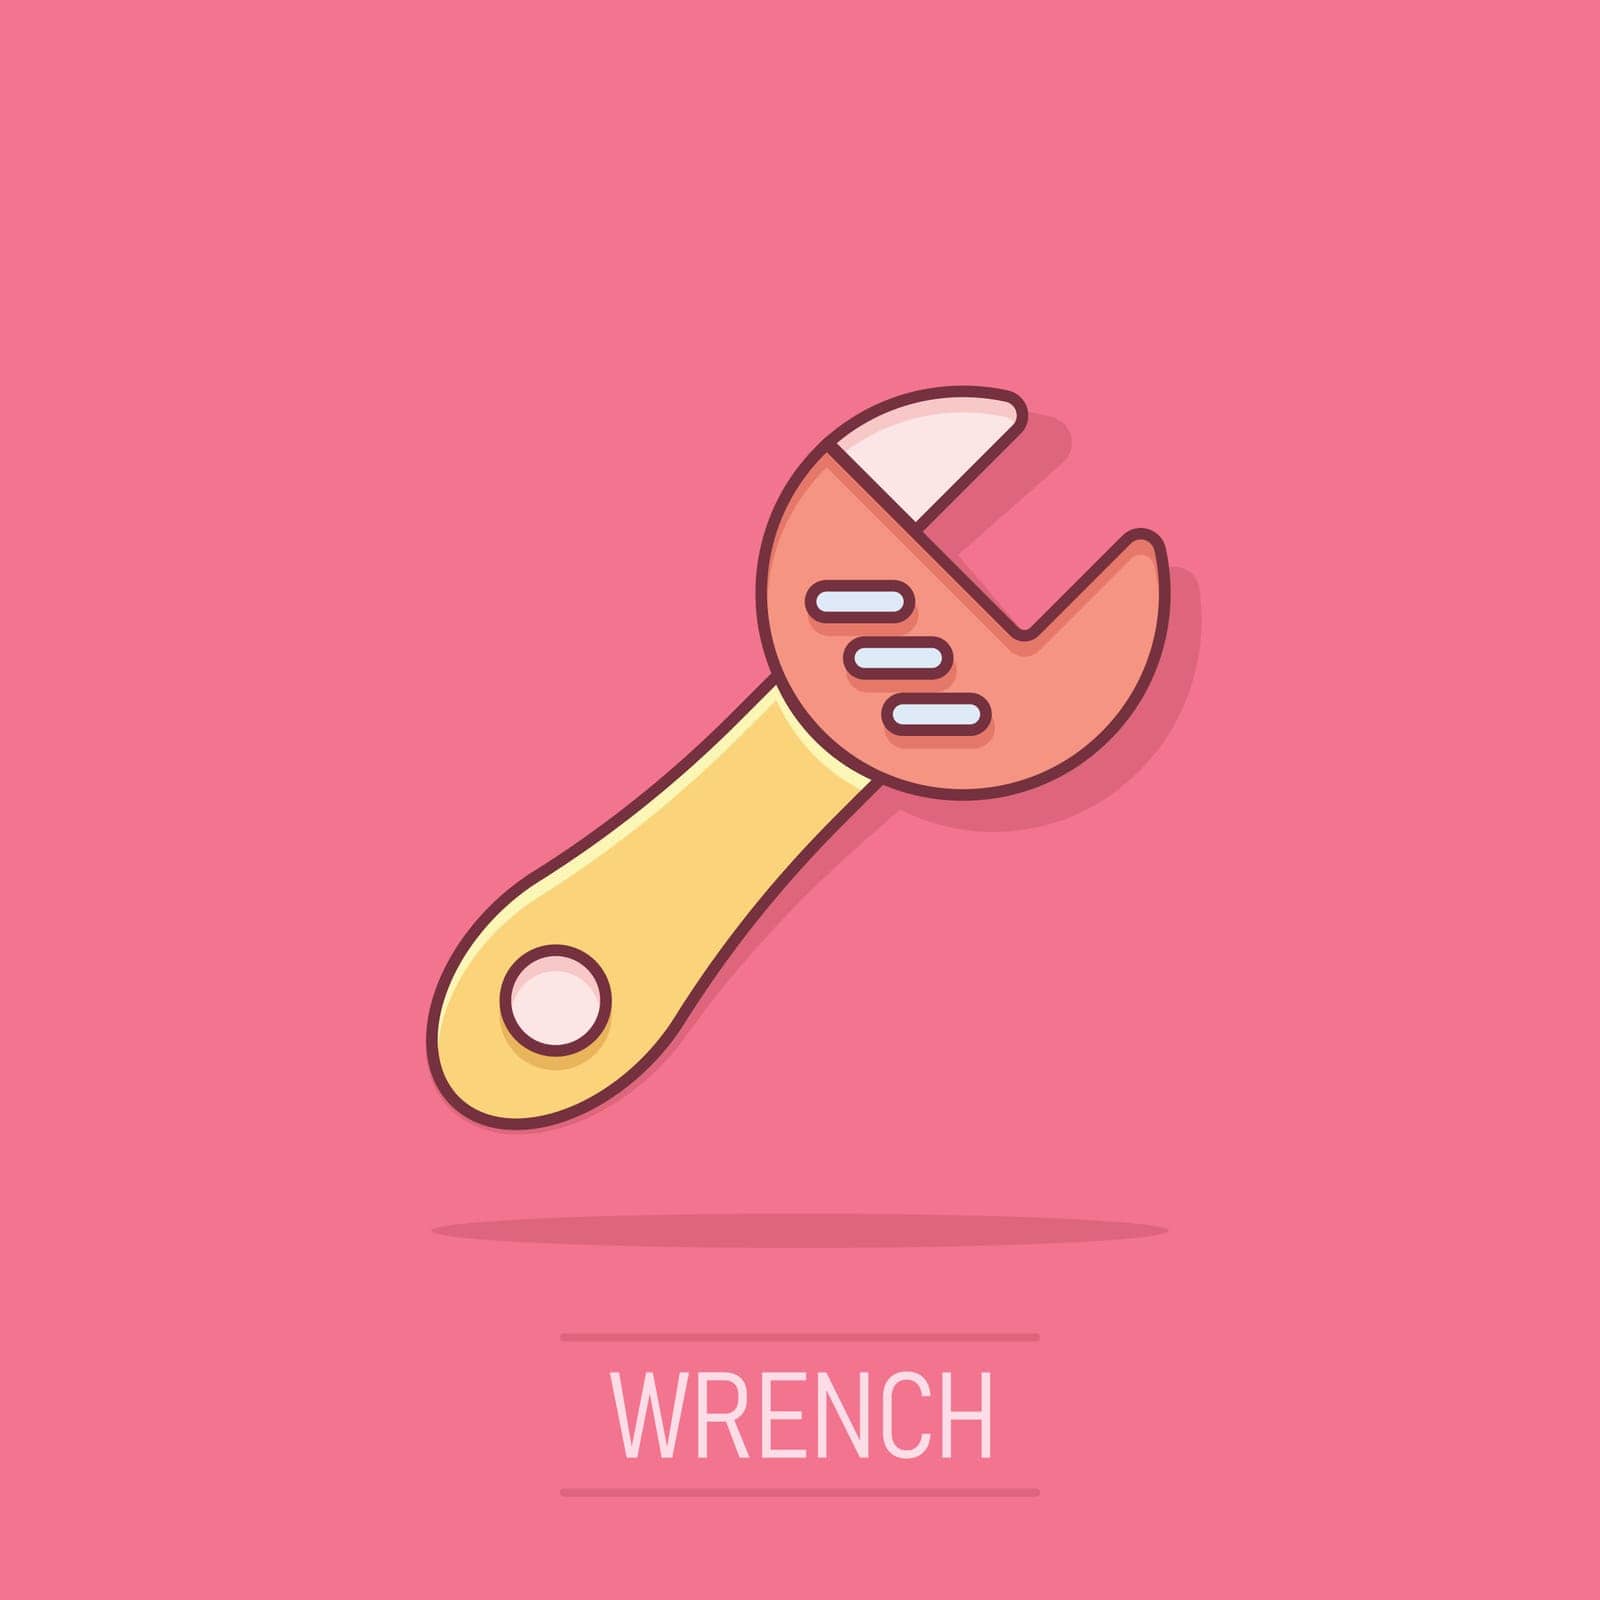 Wrench icon in comic style. Spanner key cartoon vector illustration on isolated background. Repair equipment splash effect business concept. by LysenkoA